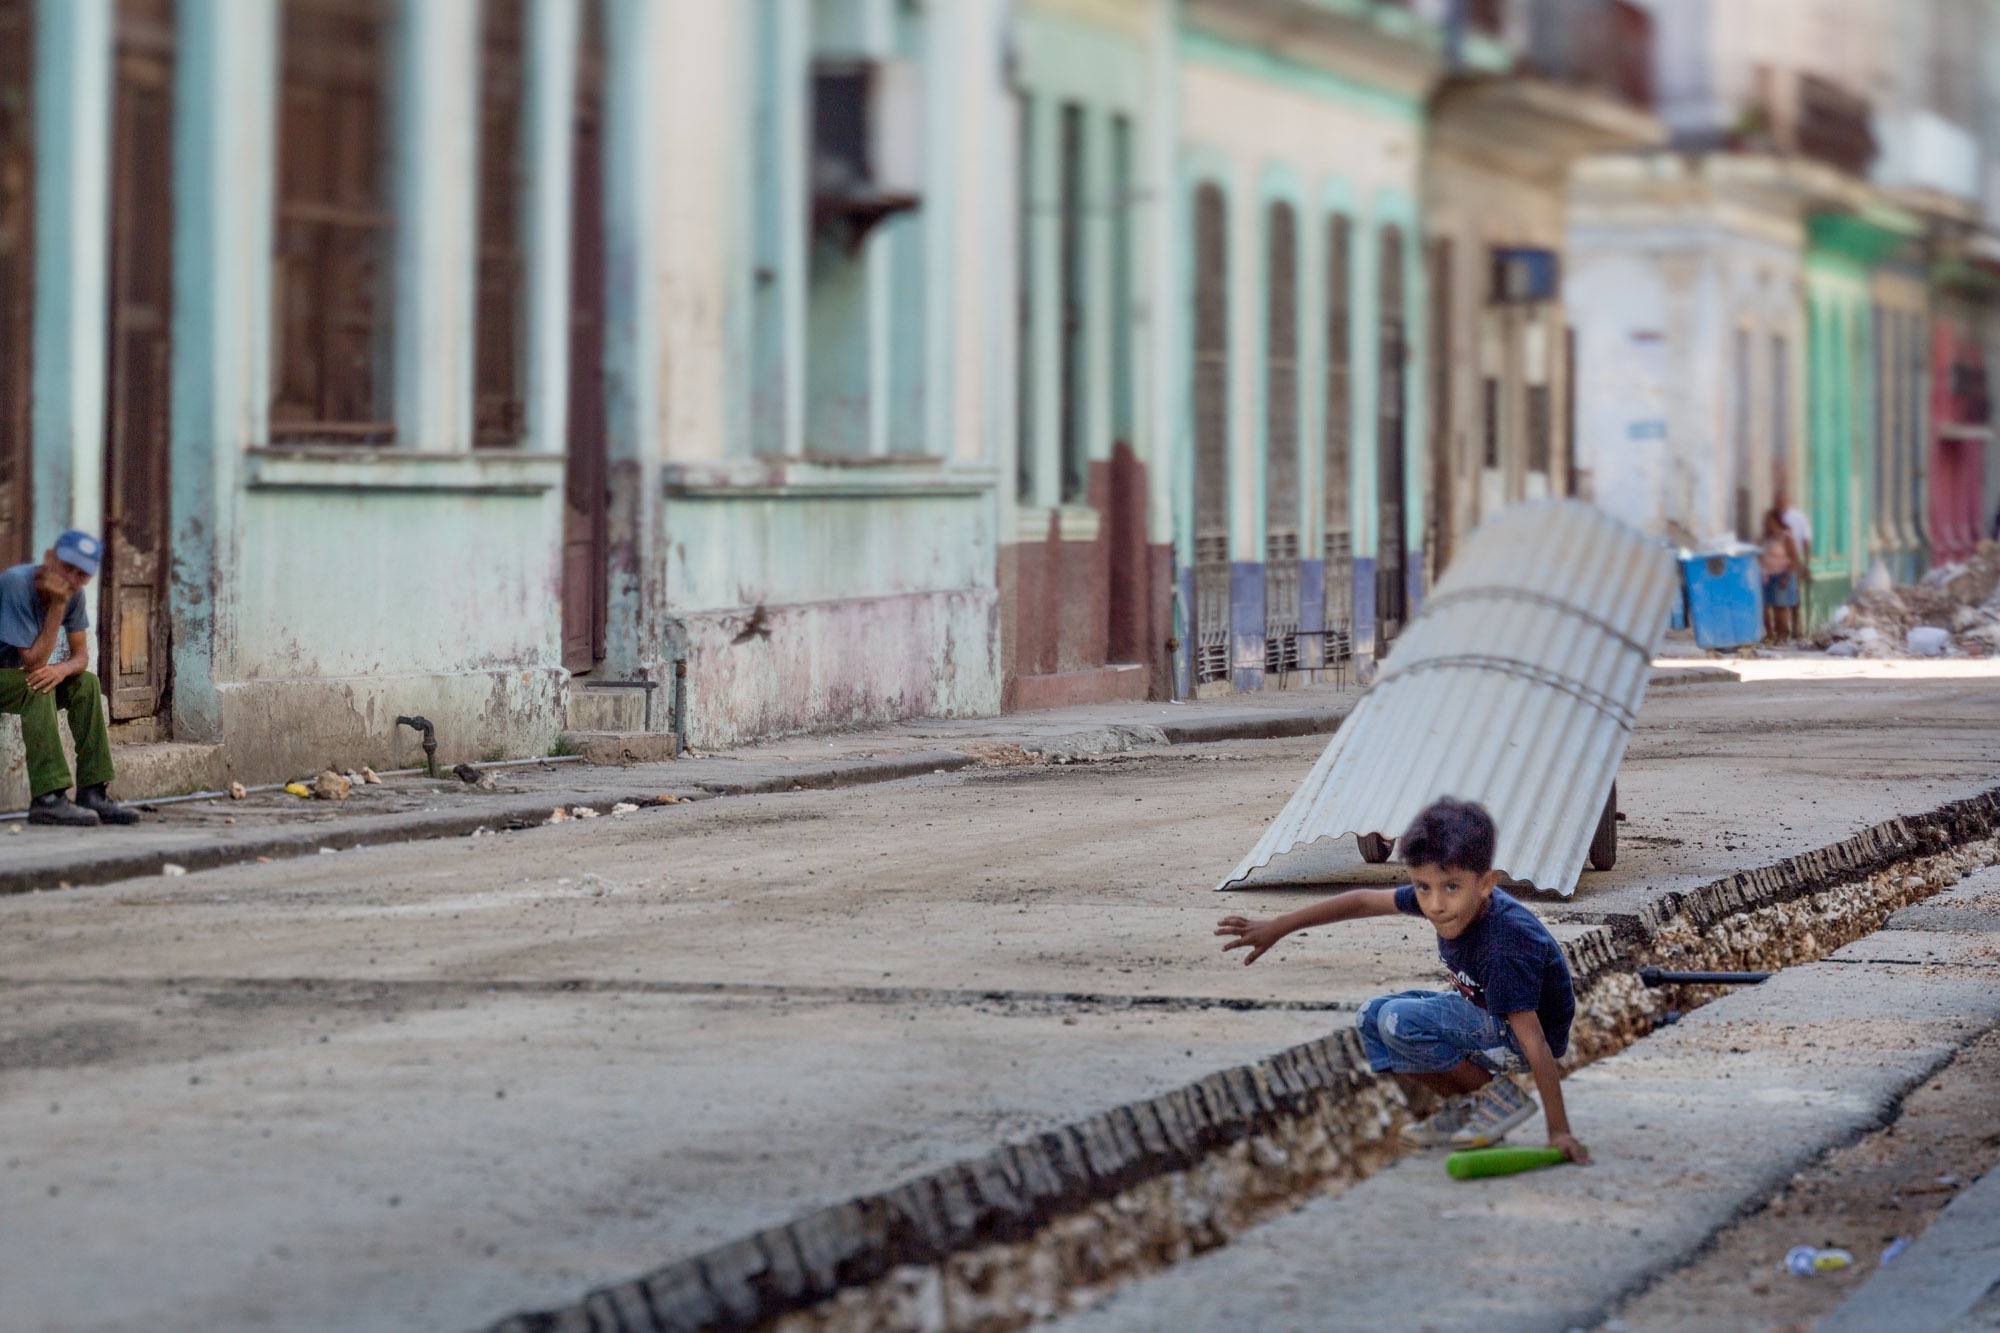 Second half of a diptych, Boys playing ball in Cuba.